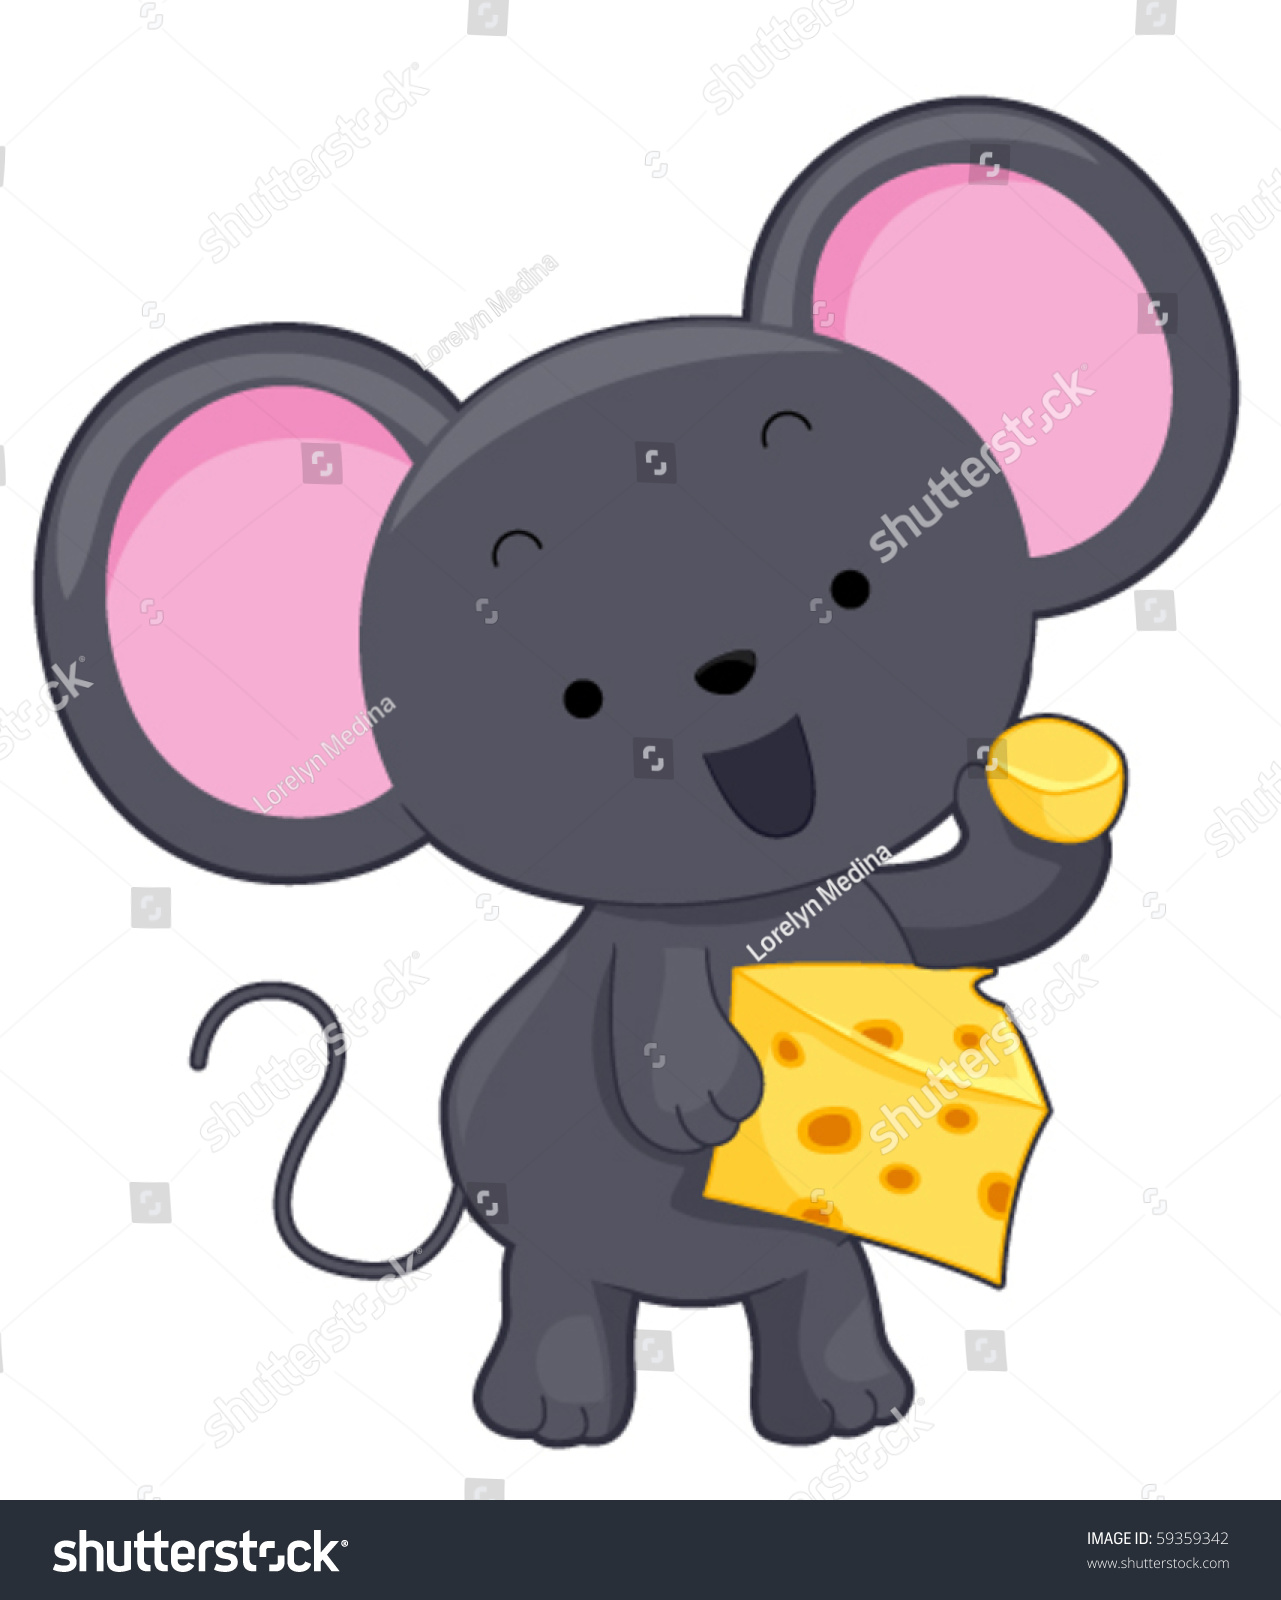 clipart of a little mouse - photo #13